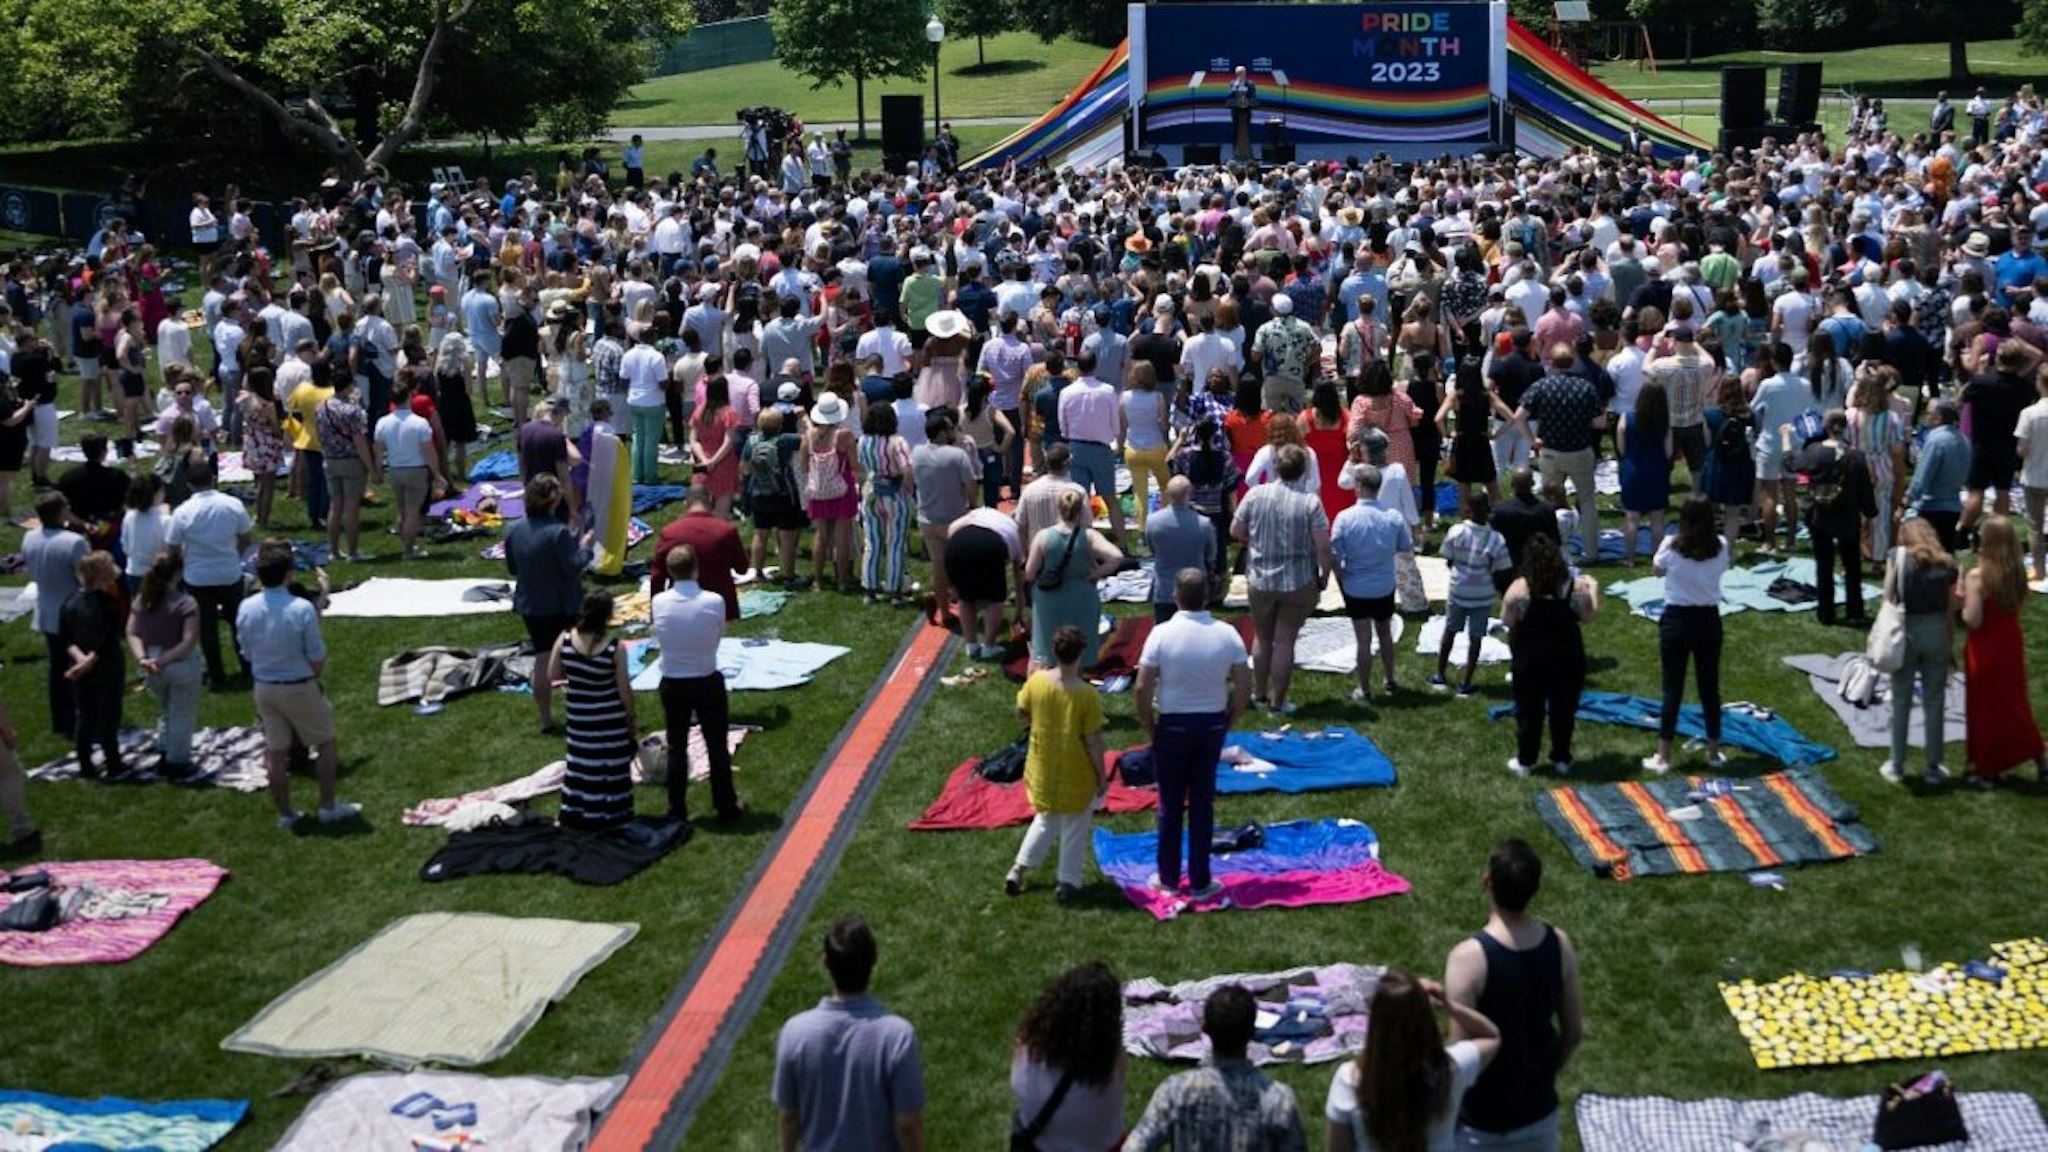 US President Joe Biden speaks during a Pride celebration on the South Lawn of the White House in Washington, DC, on June 10, 2023.